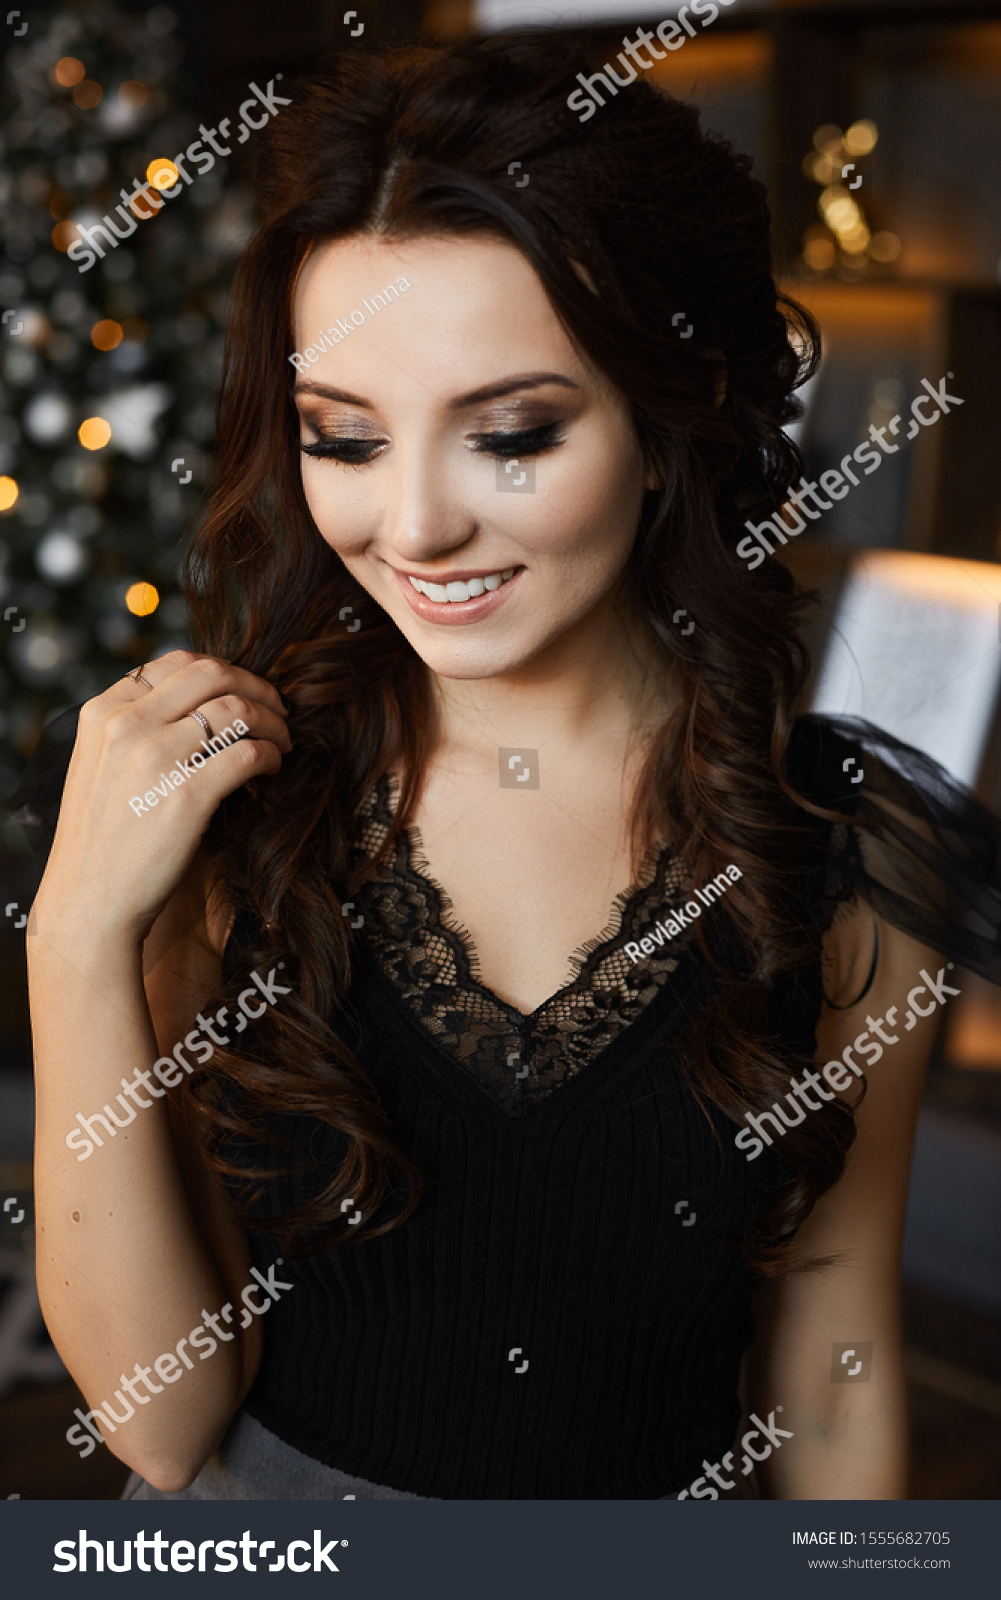 Portrait of a fashionable model girl with trendy hairstyle and trendy makeup in black blouse posing with festive lights of Christmas tree in background. Beautiful young woman with smooth perfect skin #1555682705